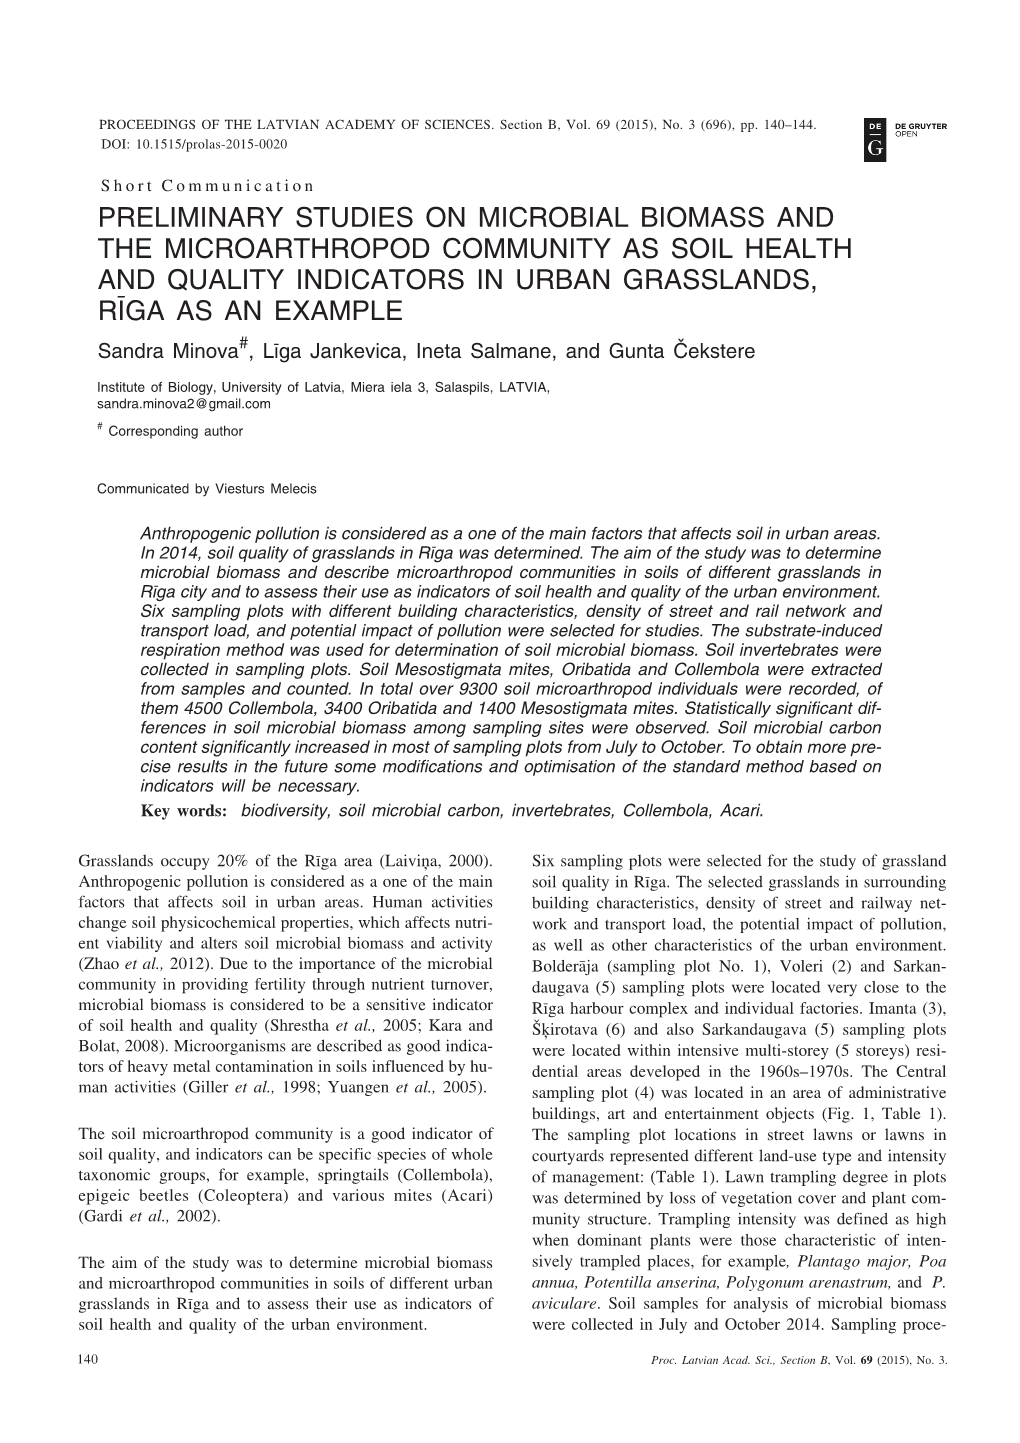 Preliminary Studies on Microbial Biomass and The